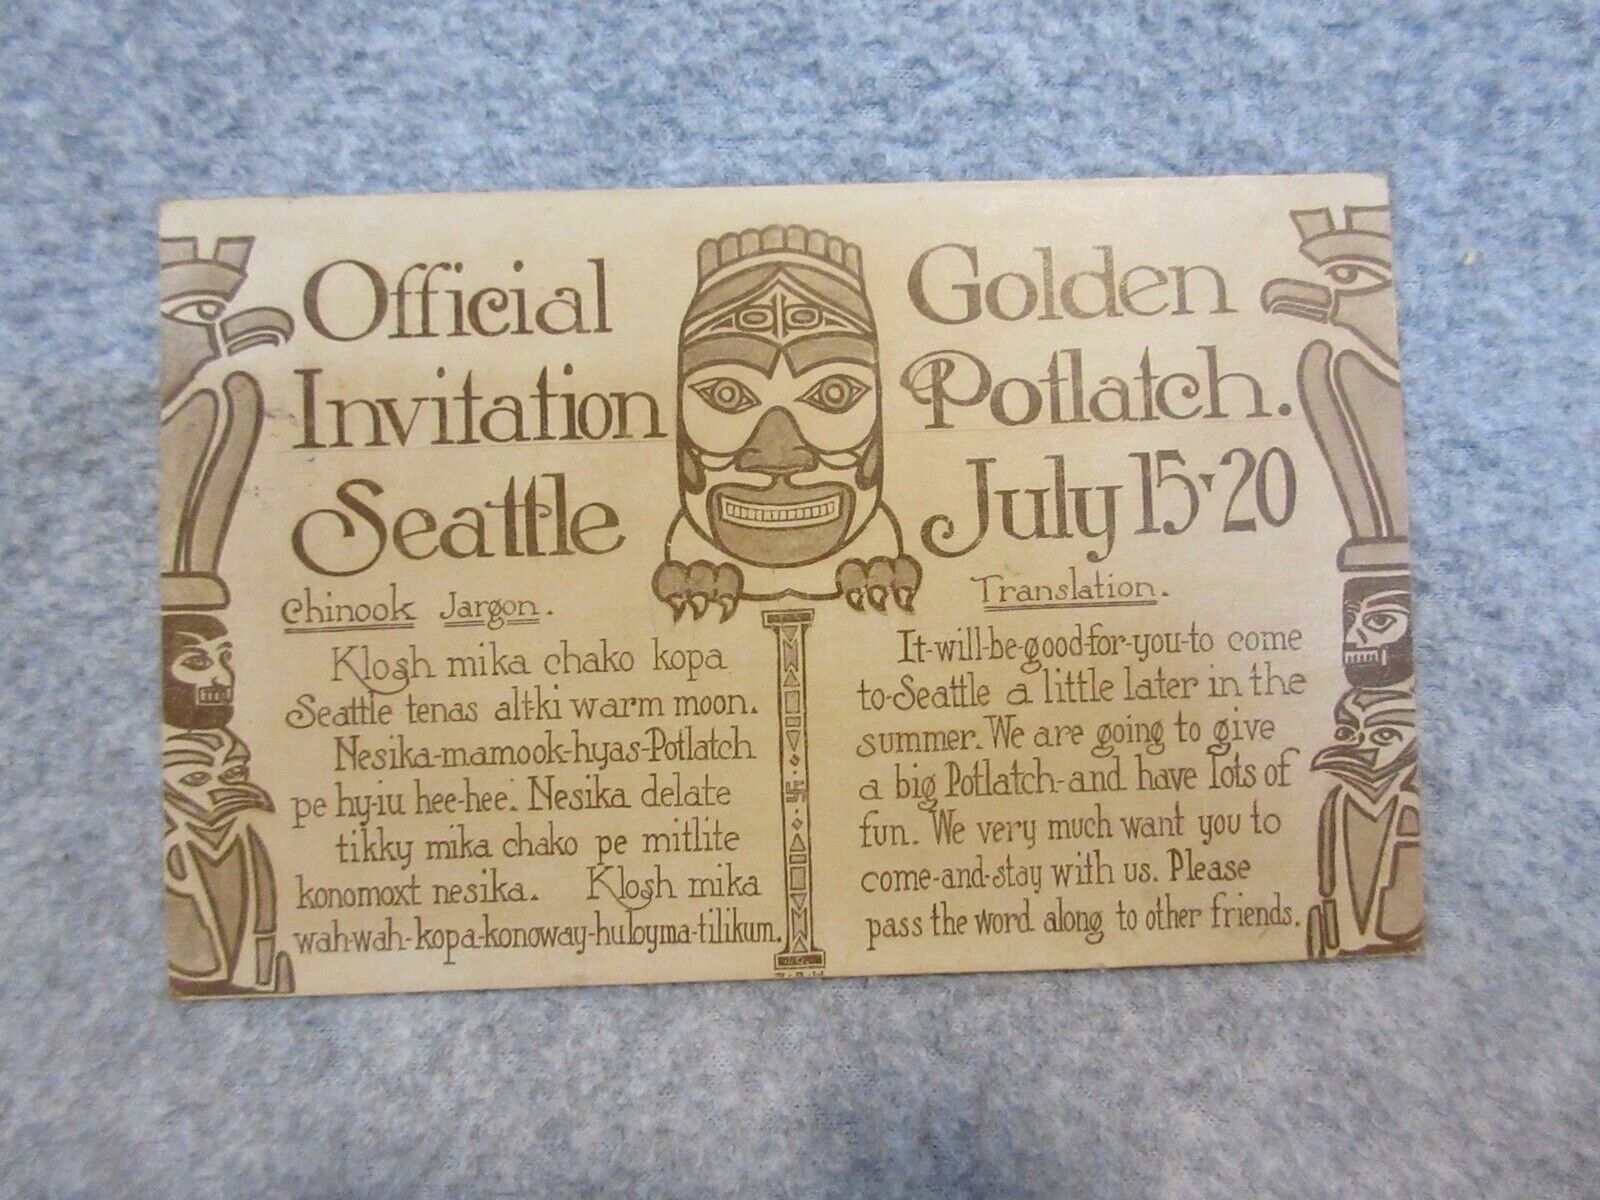 1912 Seattle GOLDEN POTLATCH INVITATION POSTCARD High-Grade   Posted Mailed 1912